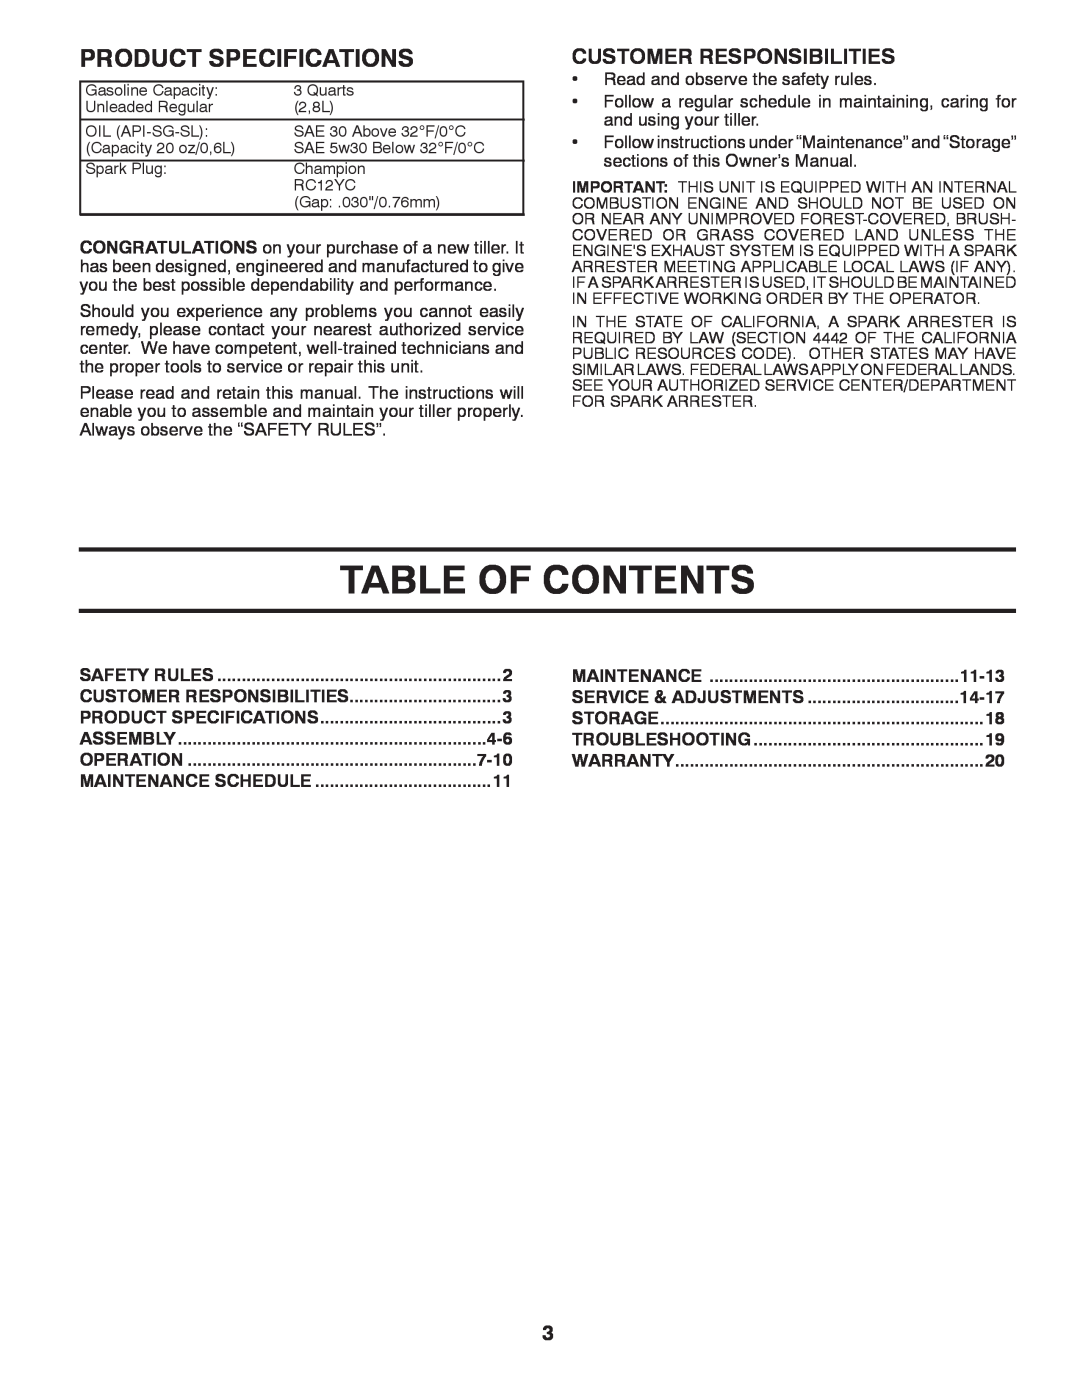 Poulan 96092002200, 433107 manual Table Of Contents, Product Specifications, Customer Responsibilities 